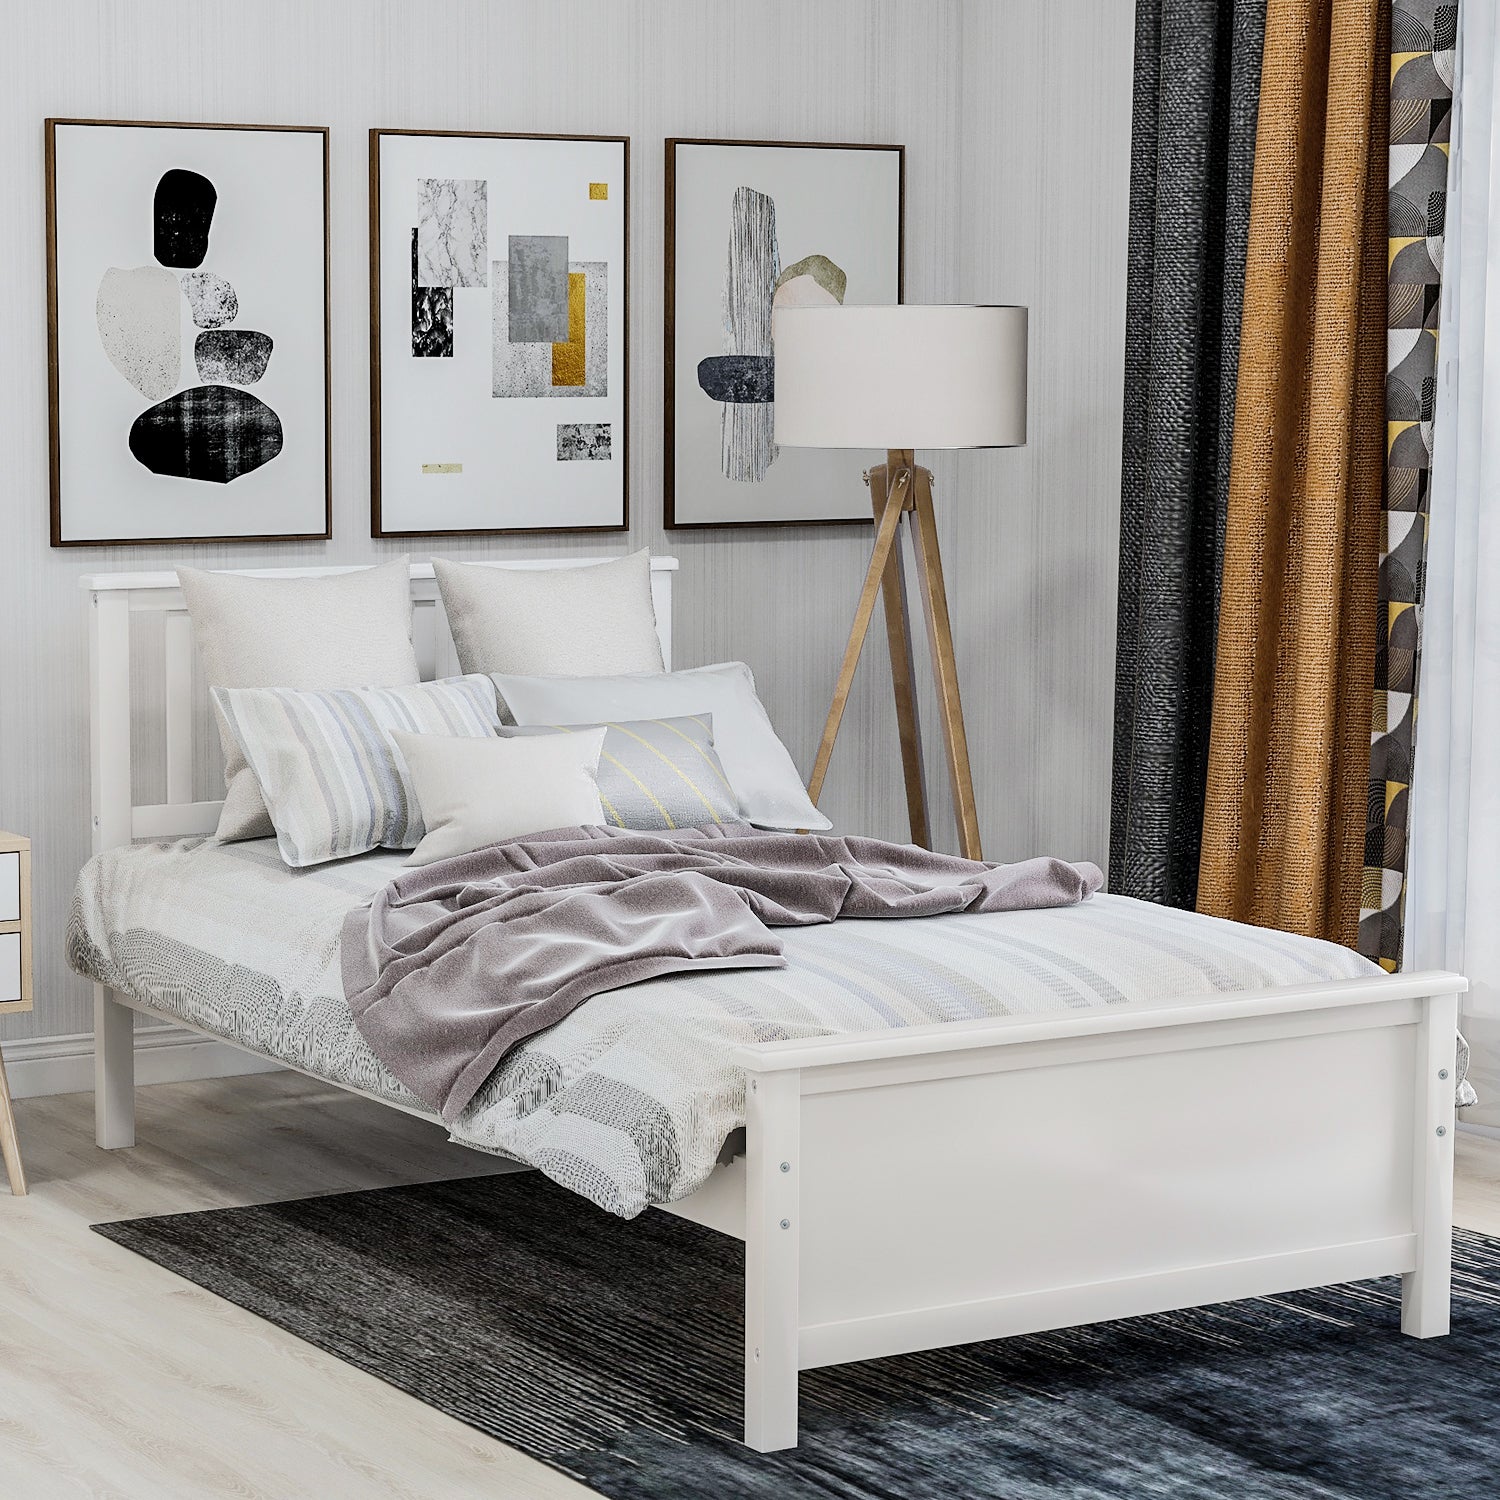 Twin-Size Platform Bed with Headboard, Footboard and Wood Slat By: Alabama Beds